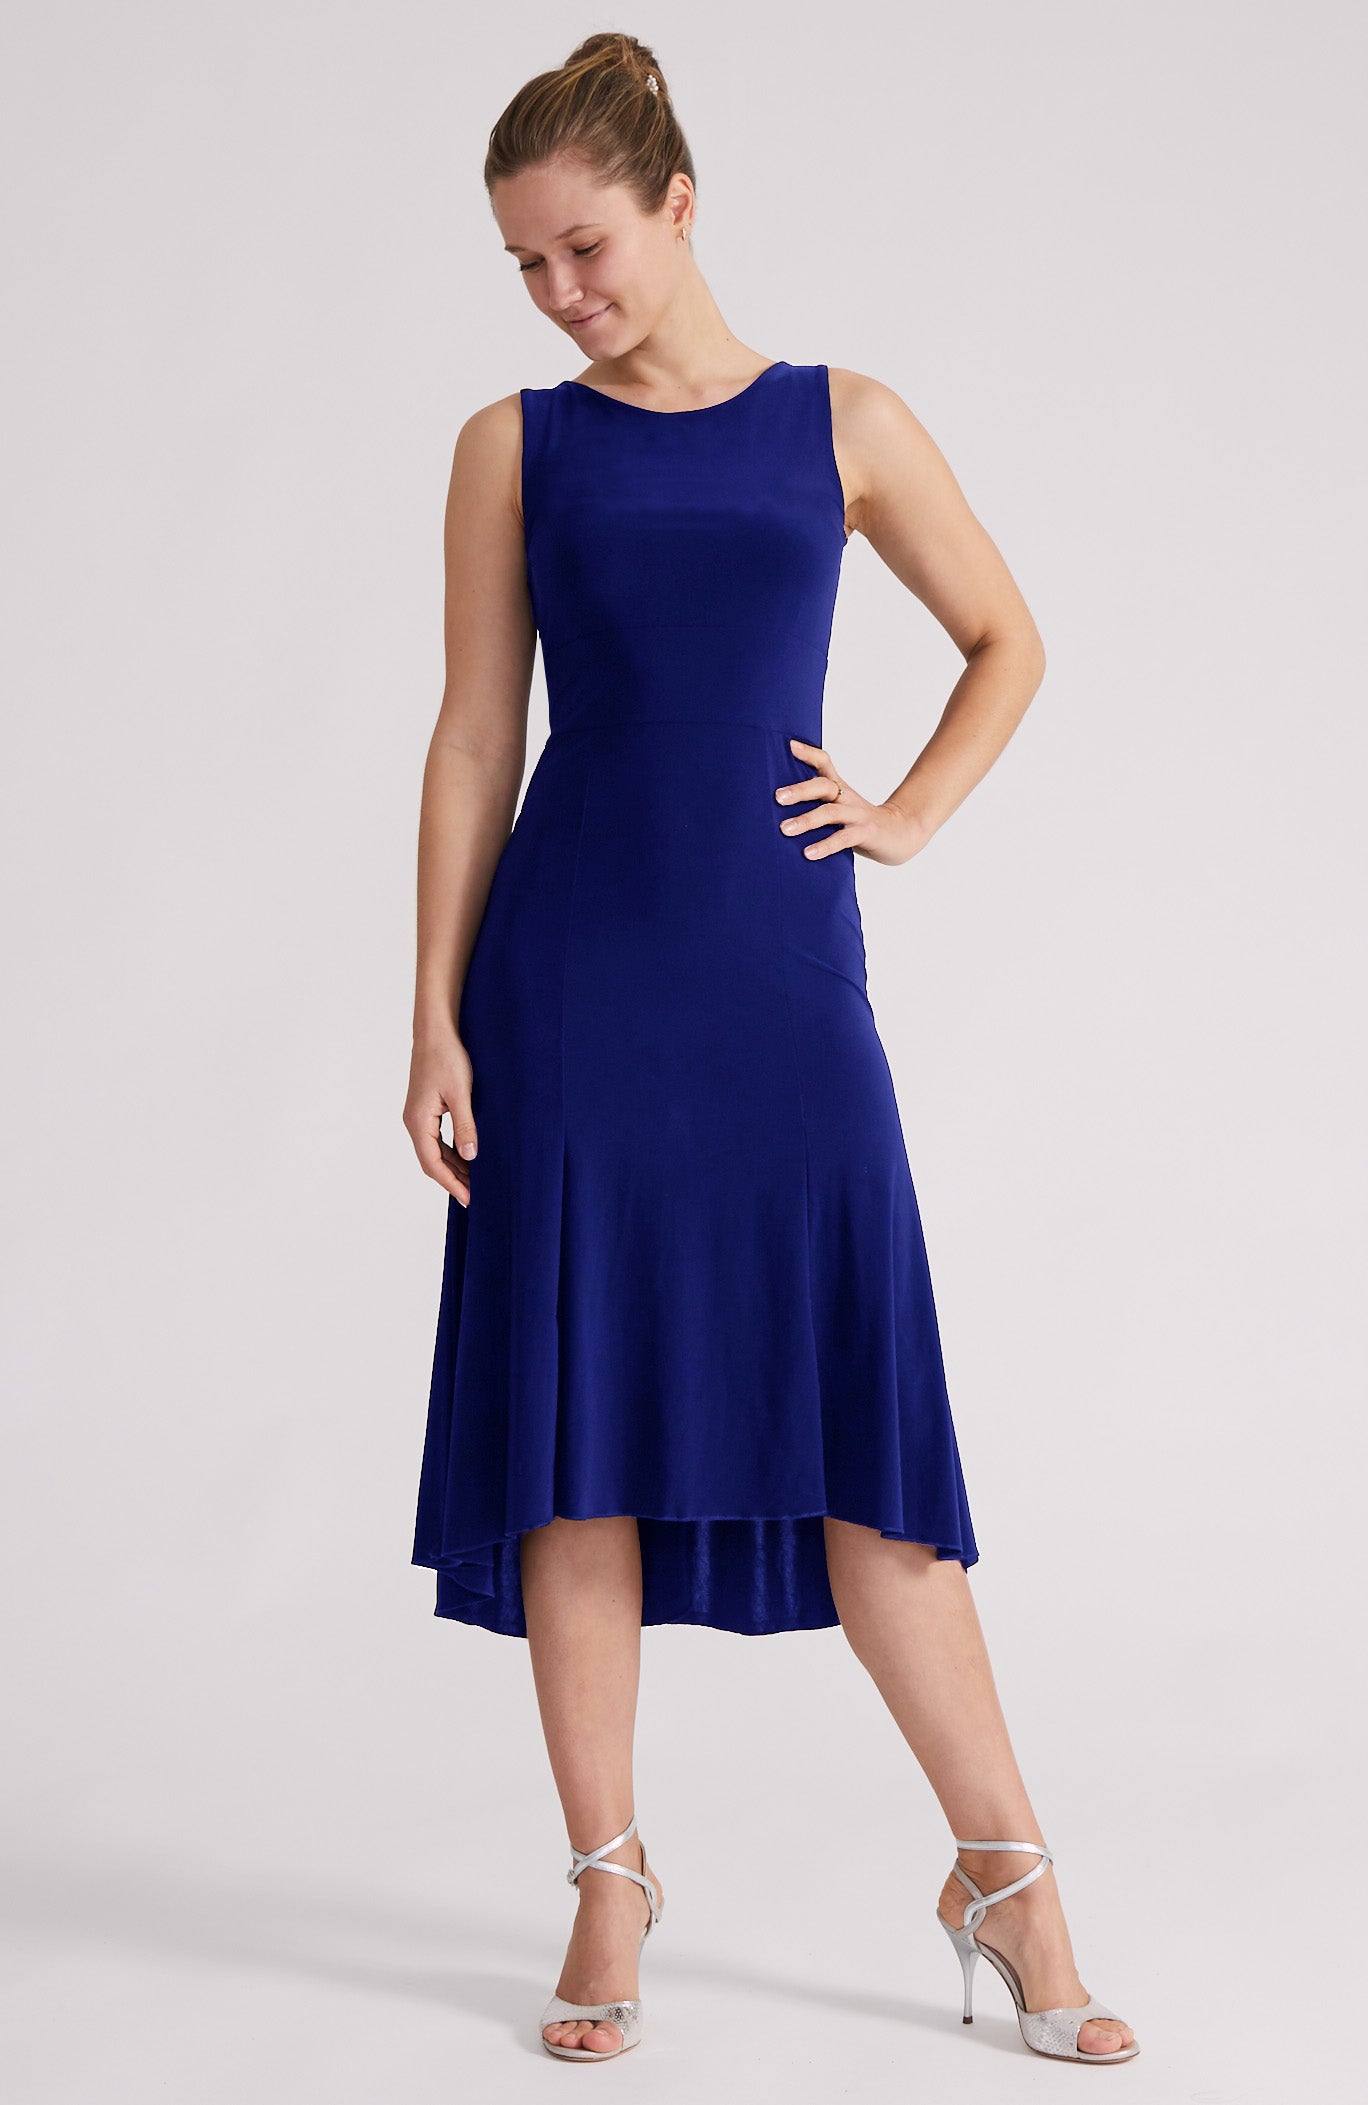 argentine tango dress in royal blue